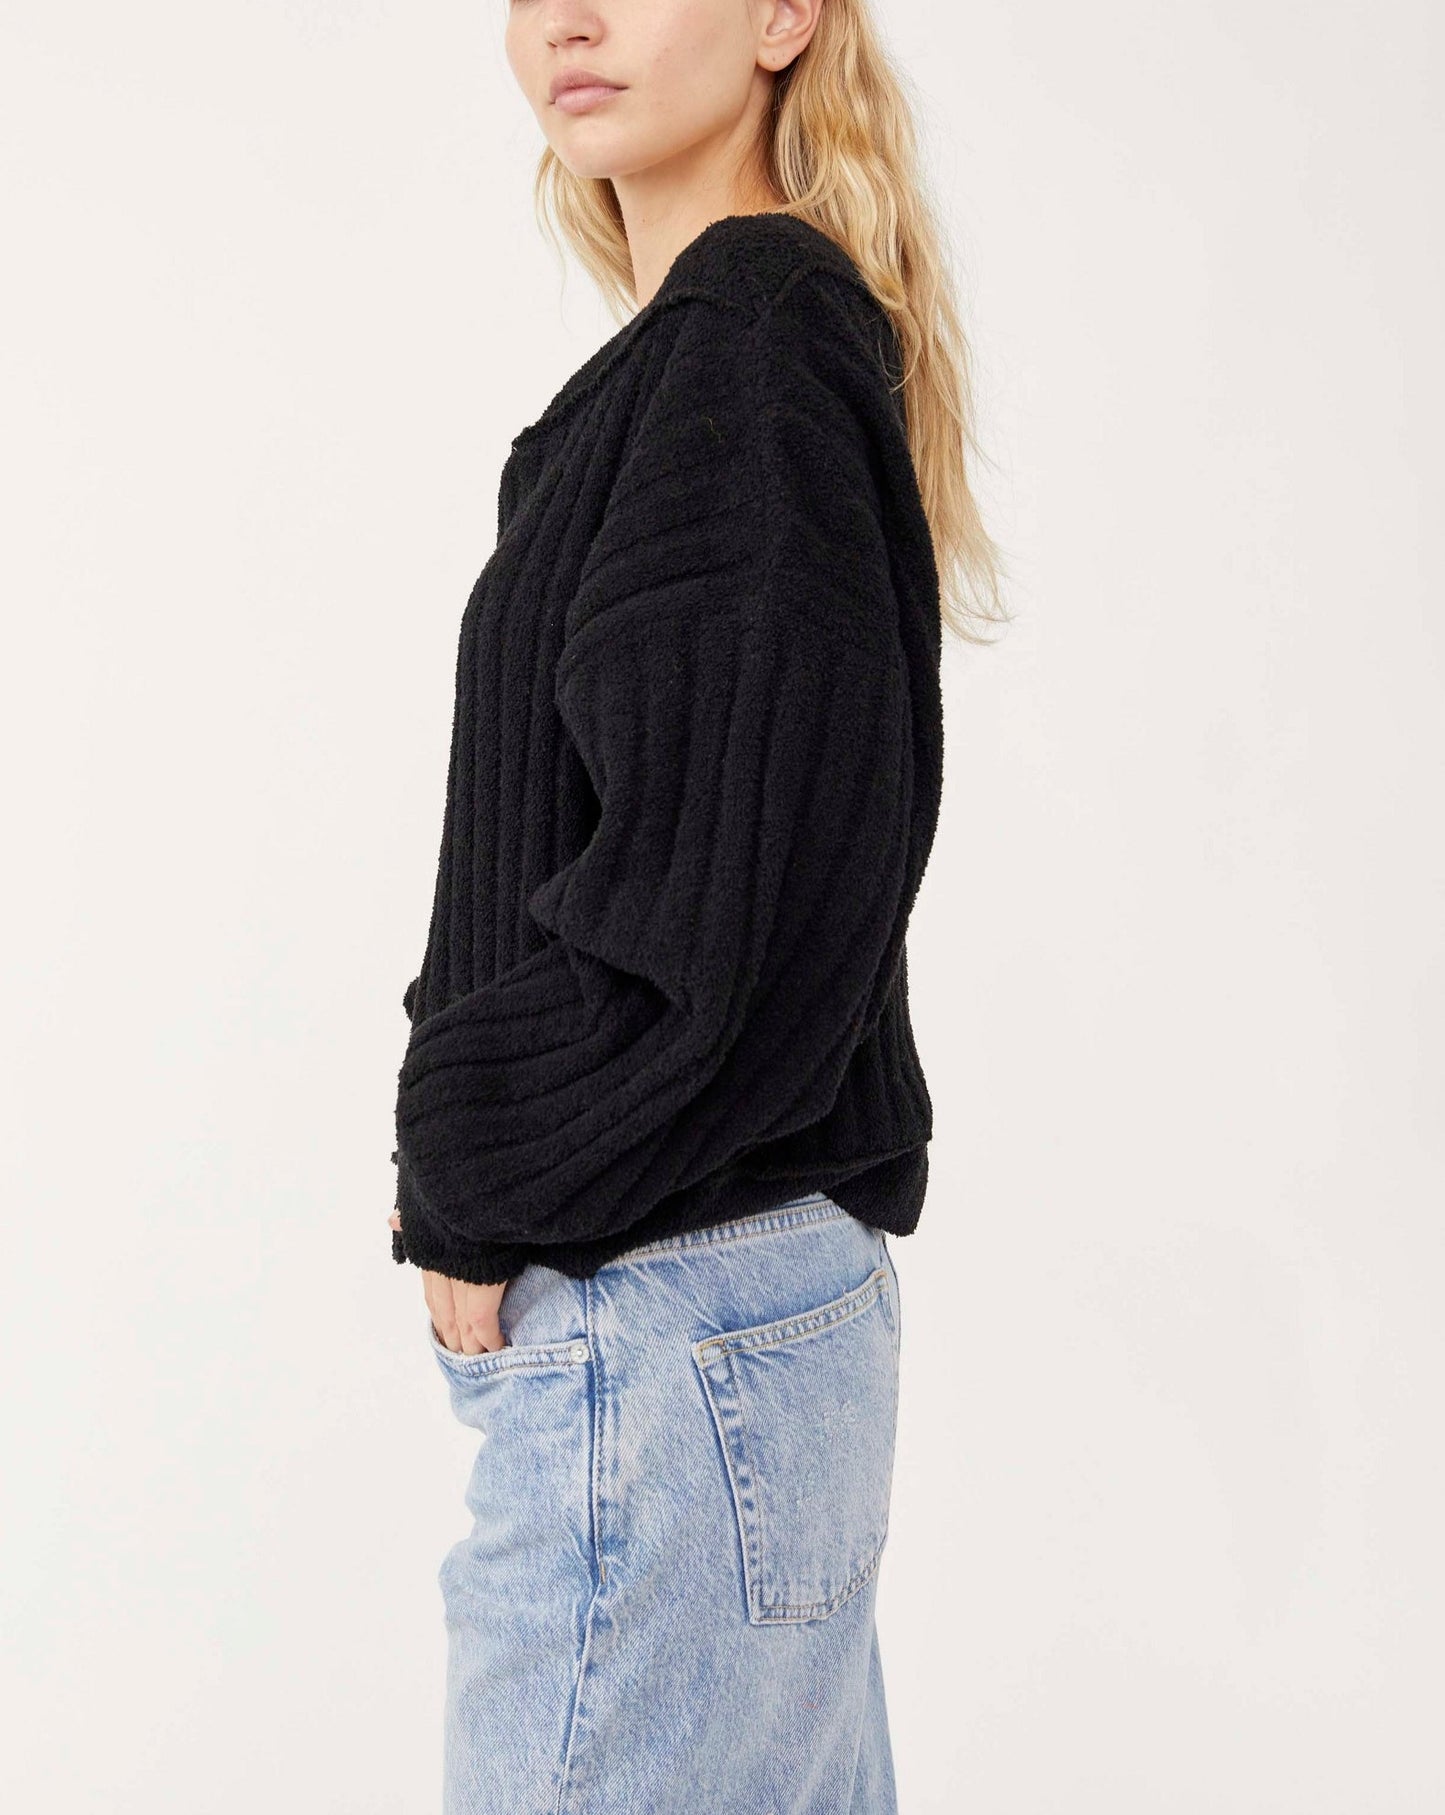 Cabin Fever Pullover Free People